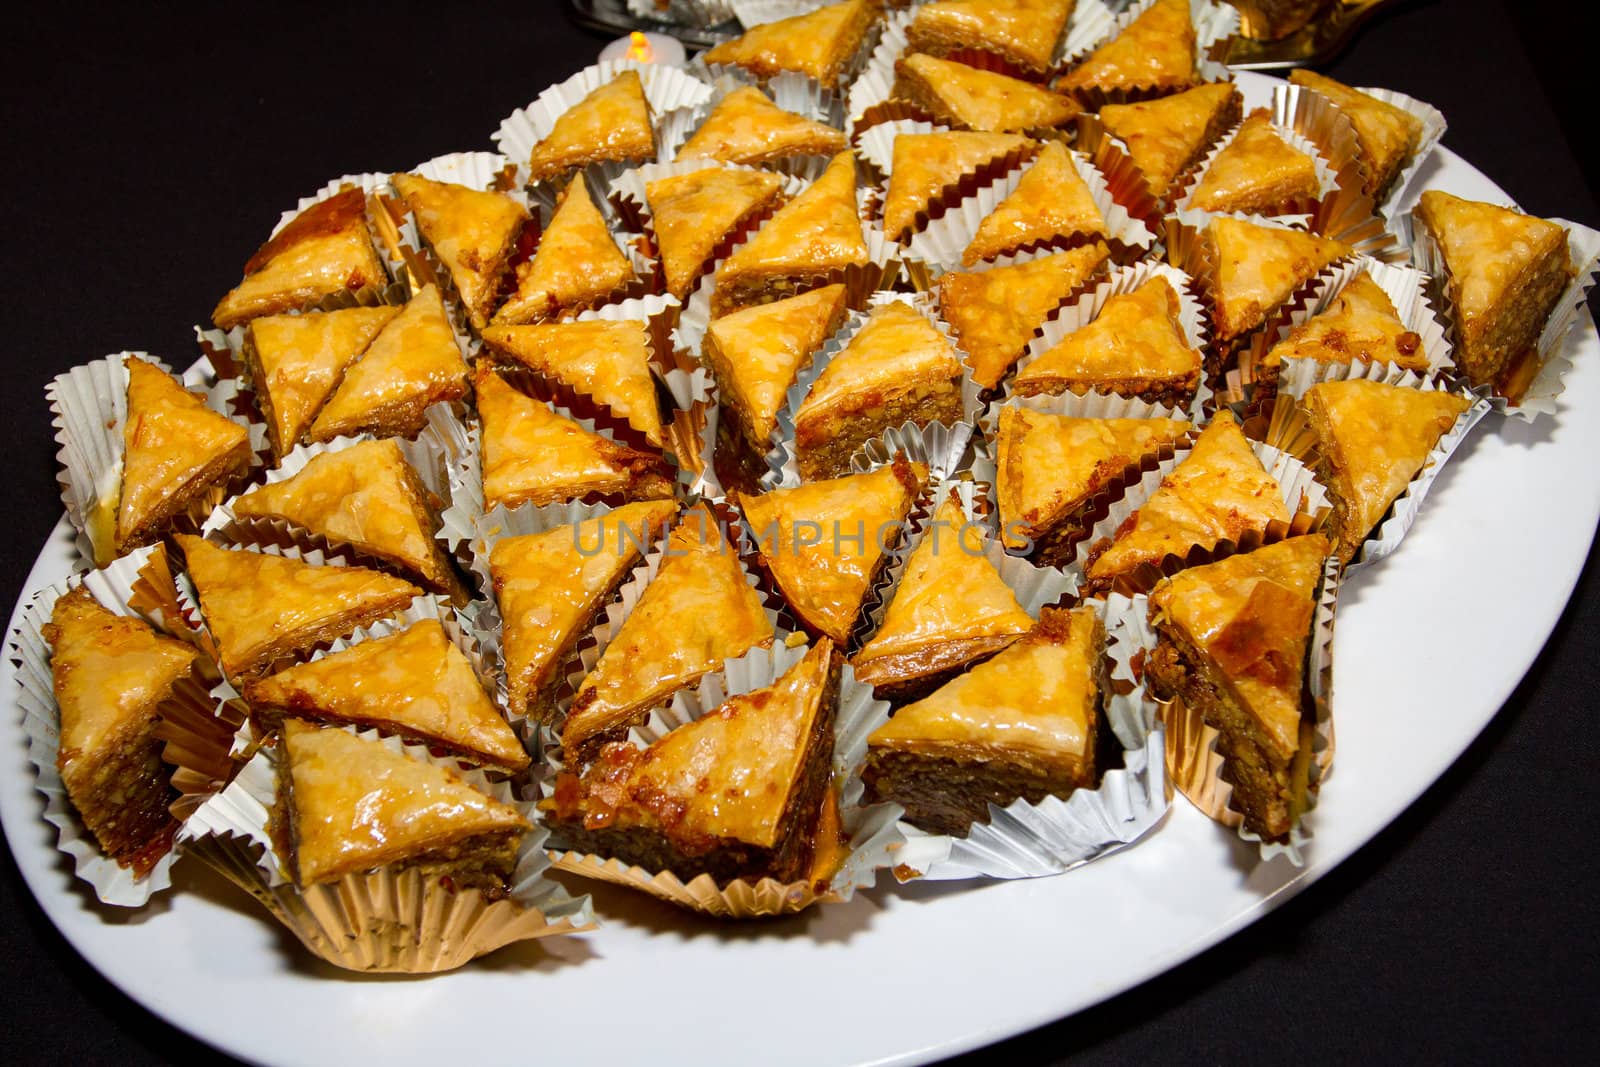 The Greek dessert baklava is individually wrapped and set on a platter at a wedding reception.